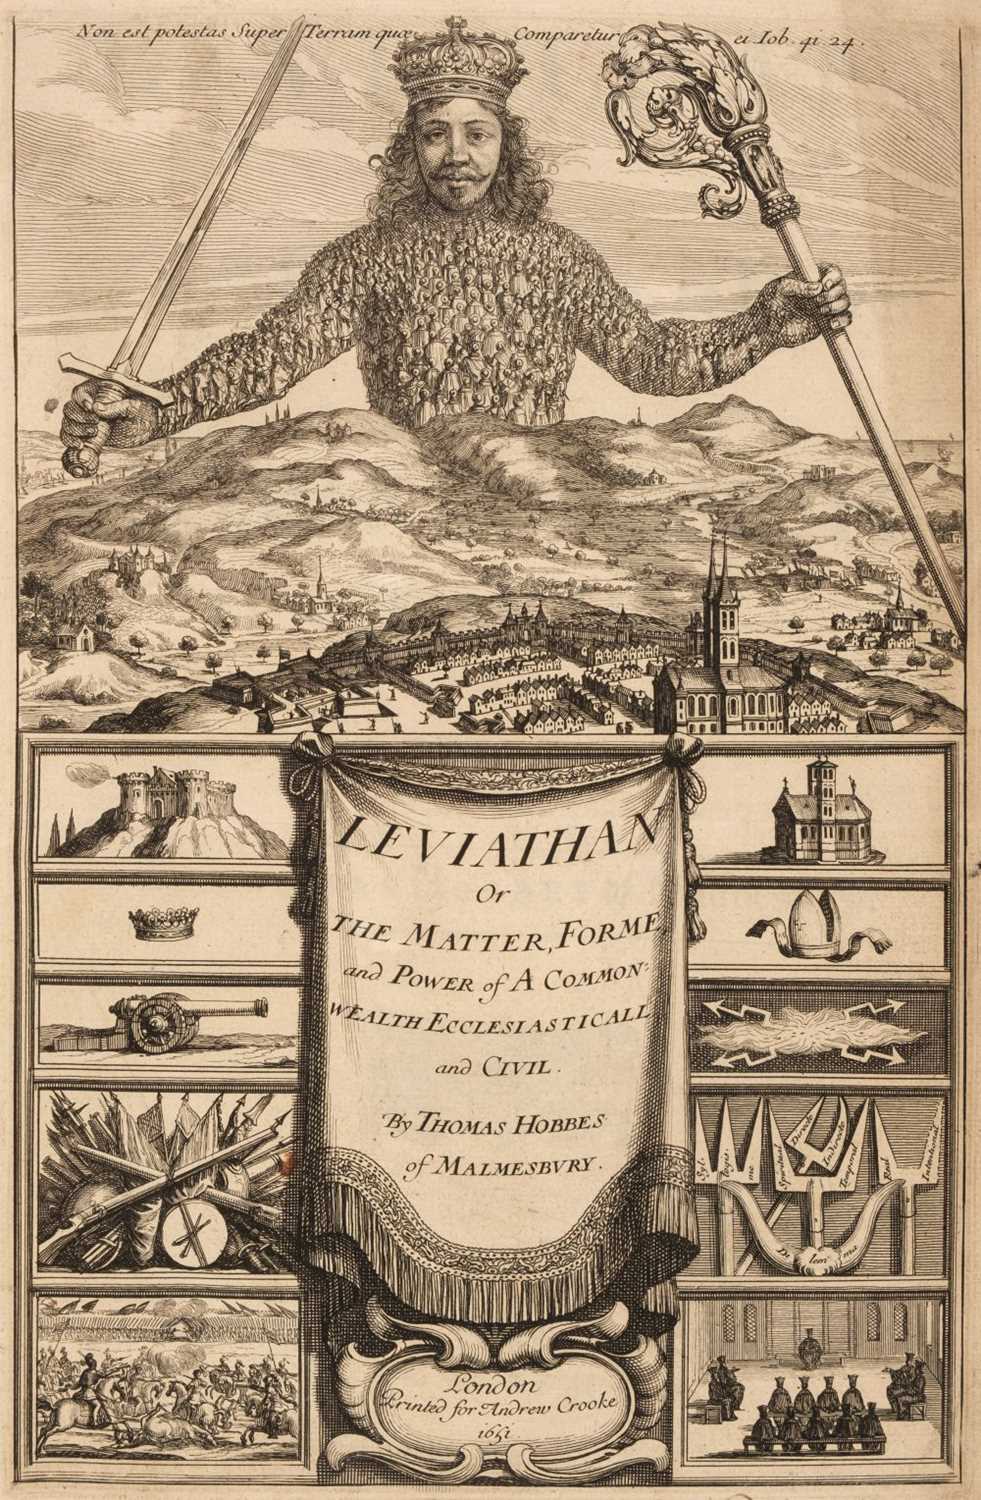 Lot 313 - Hobbes (Thomas). Leviathan, 1st edition, 1st issue, 1651, attractive copy